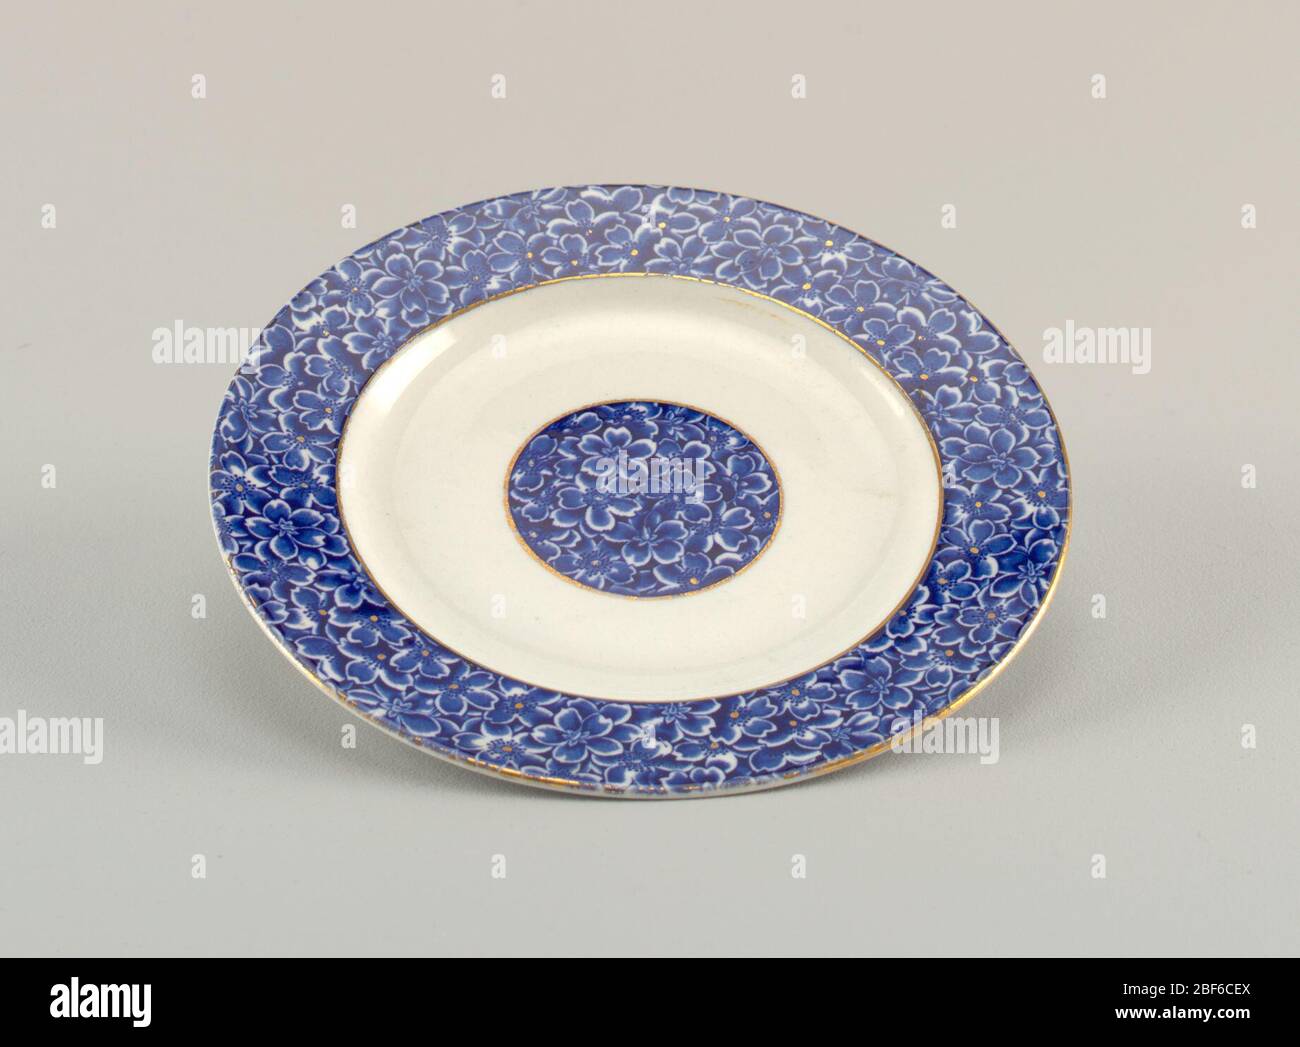 Plates with Blue Flower Pattern. Two plates with blue floral marli and center medallion on white ground. Stock Photo